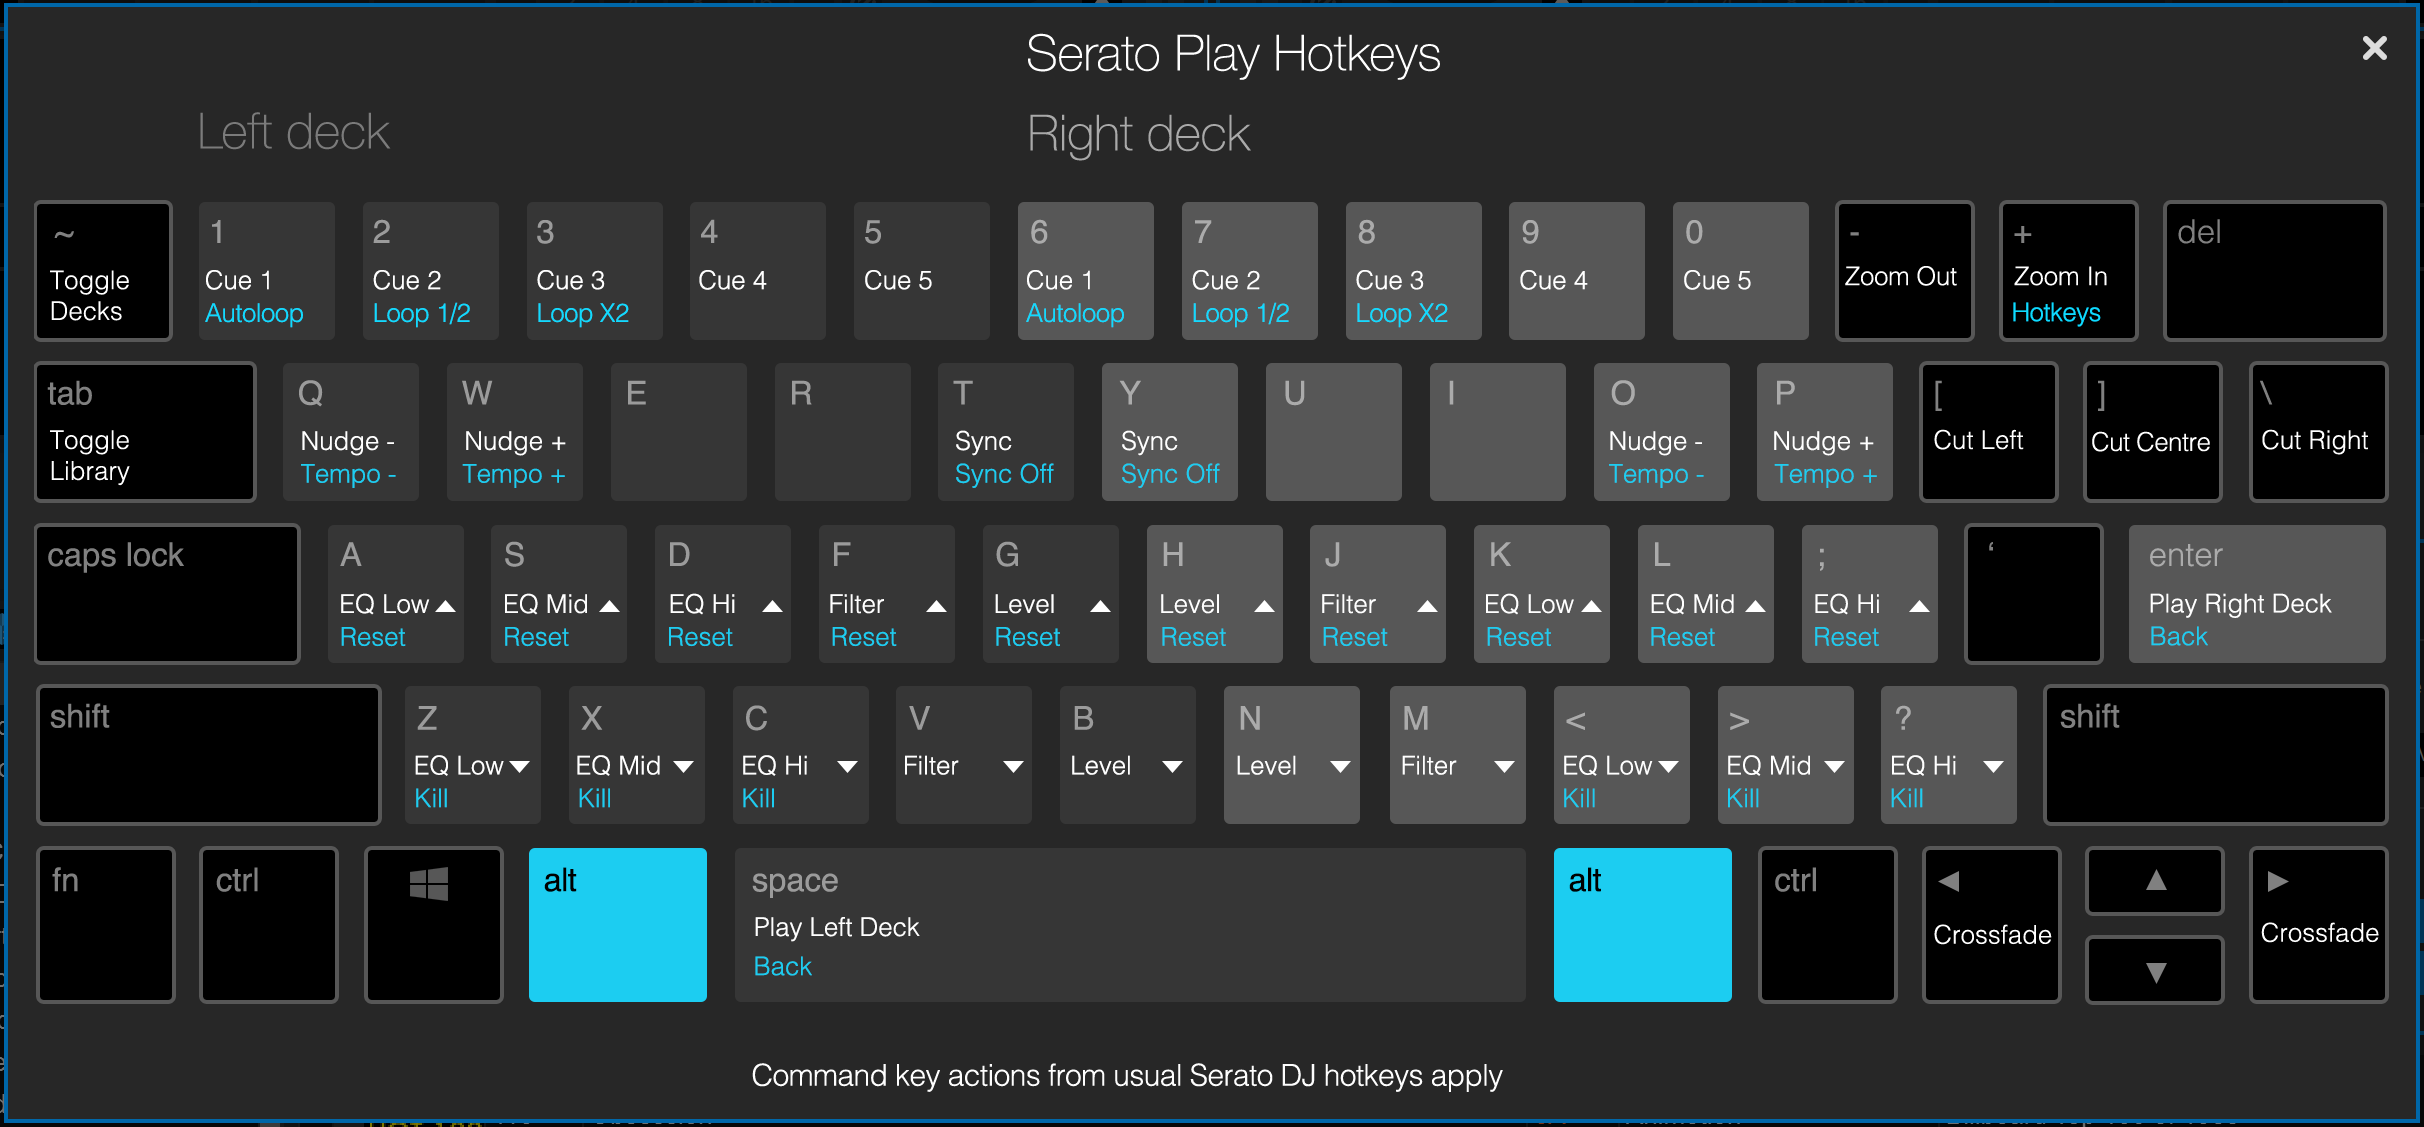 These are the default Serato Play keybinds - you can freely edit and customize them. | Source: serato.com